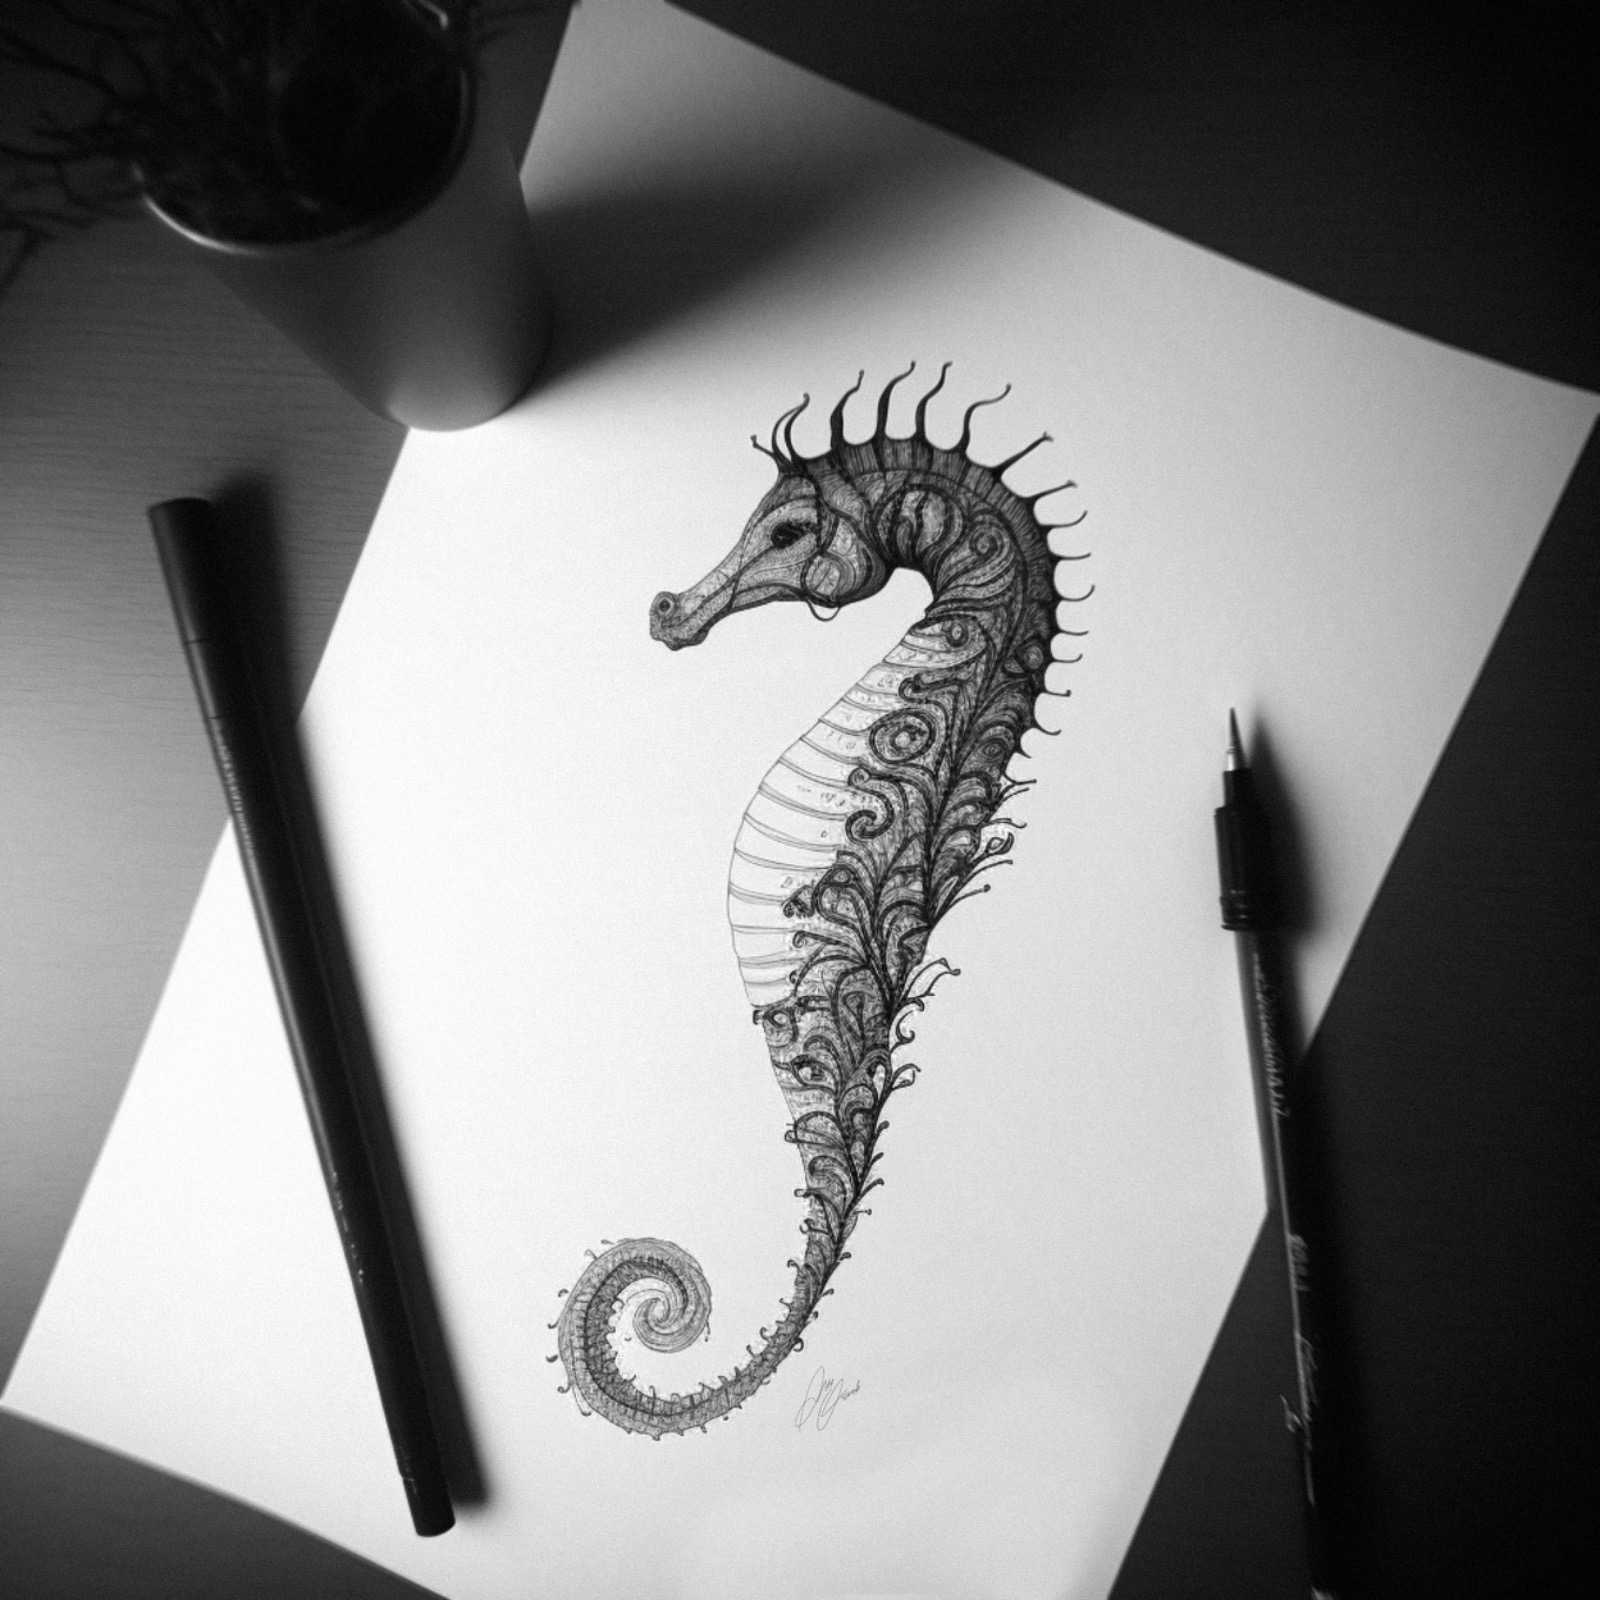 How to draw a seahorse drawing | Easy step by Step Drawing for kids -  YouTube